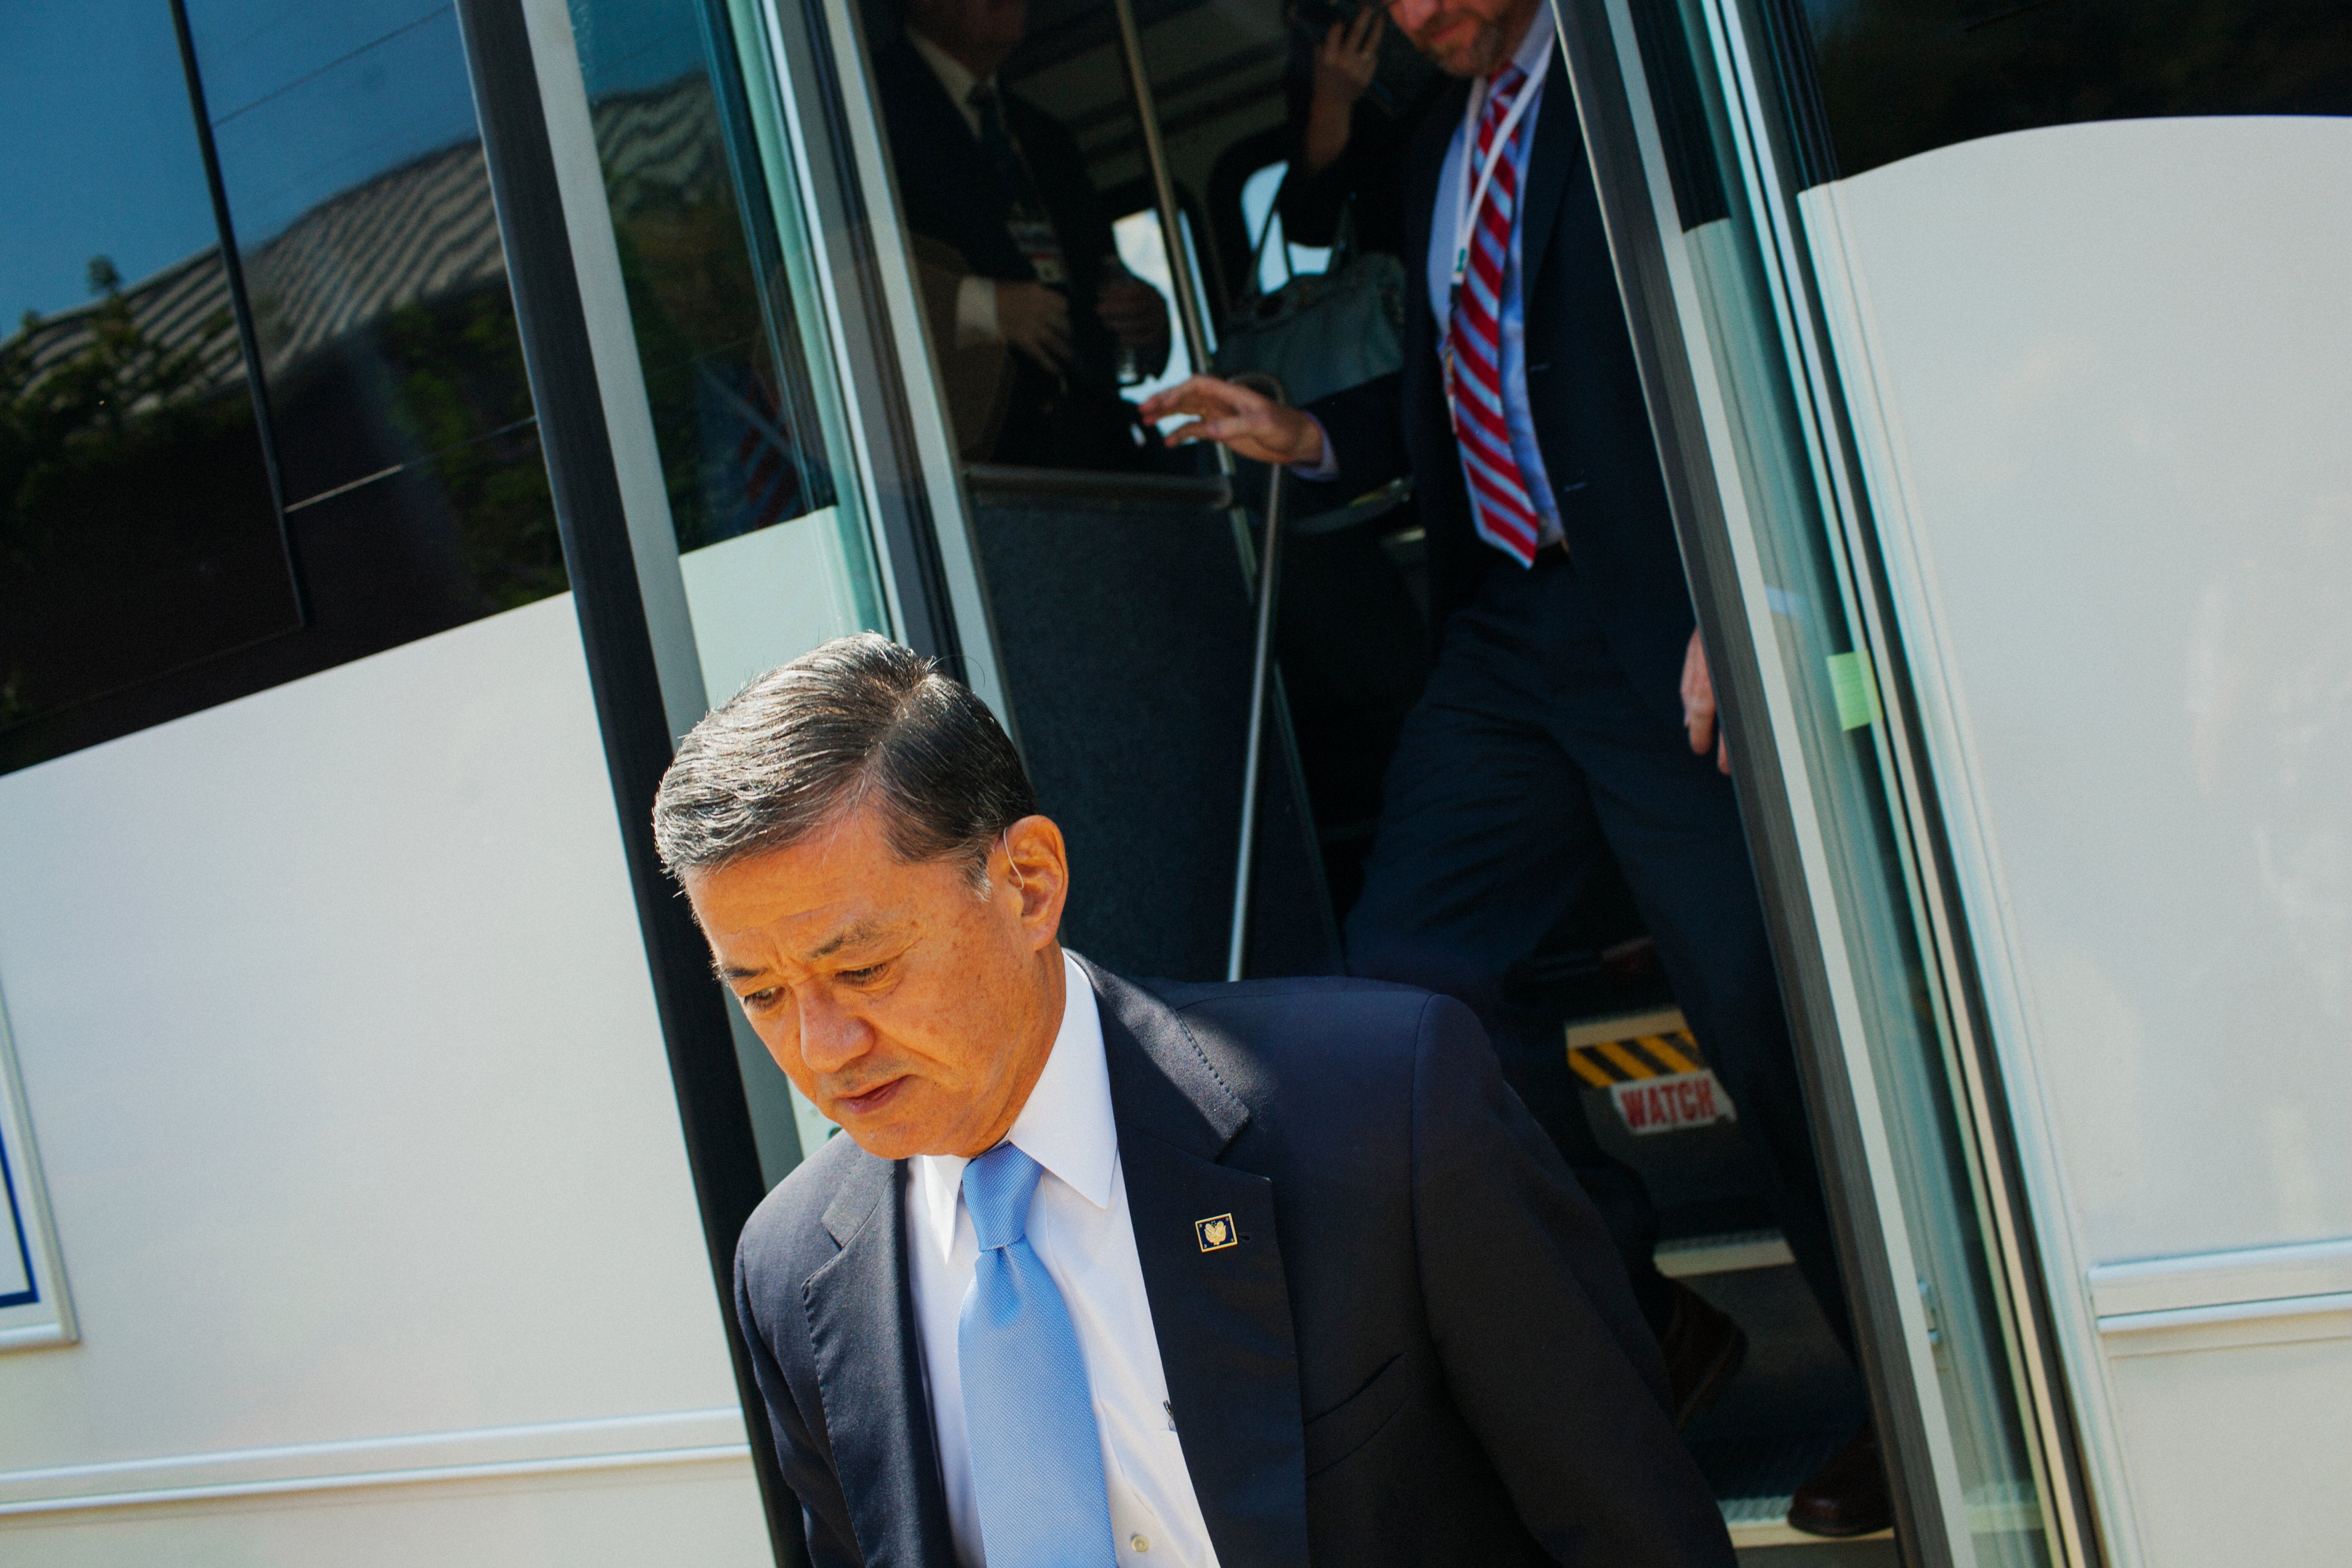 Secretary of Veterans Affairs, Eric K. Shinseki exits a shuttle while being given a tour of the VA Medical Center-Hampton, in Hampton, Virginia. (The Washington Post/Getty Images)